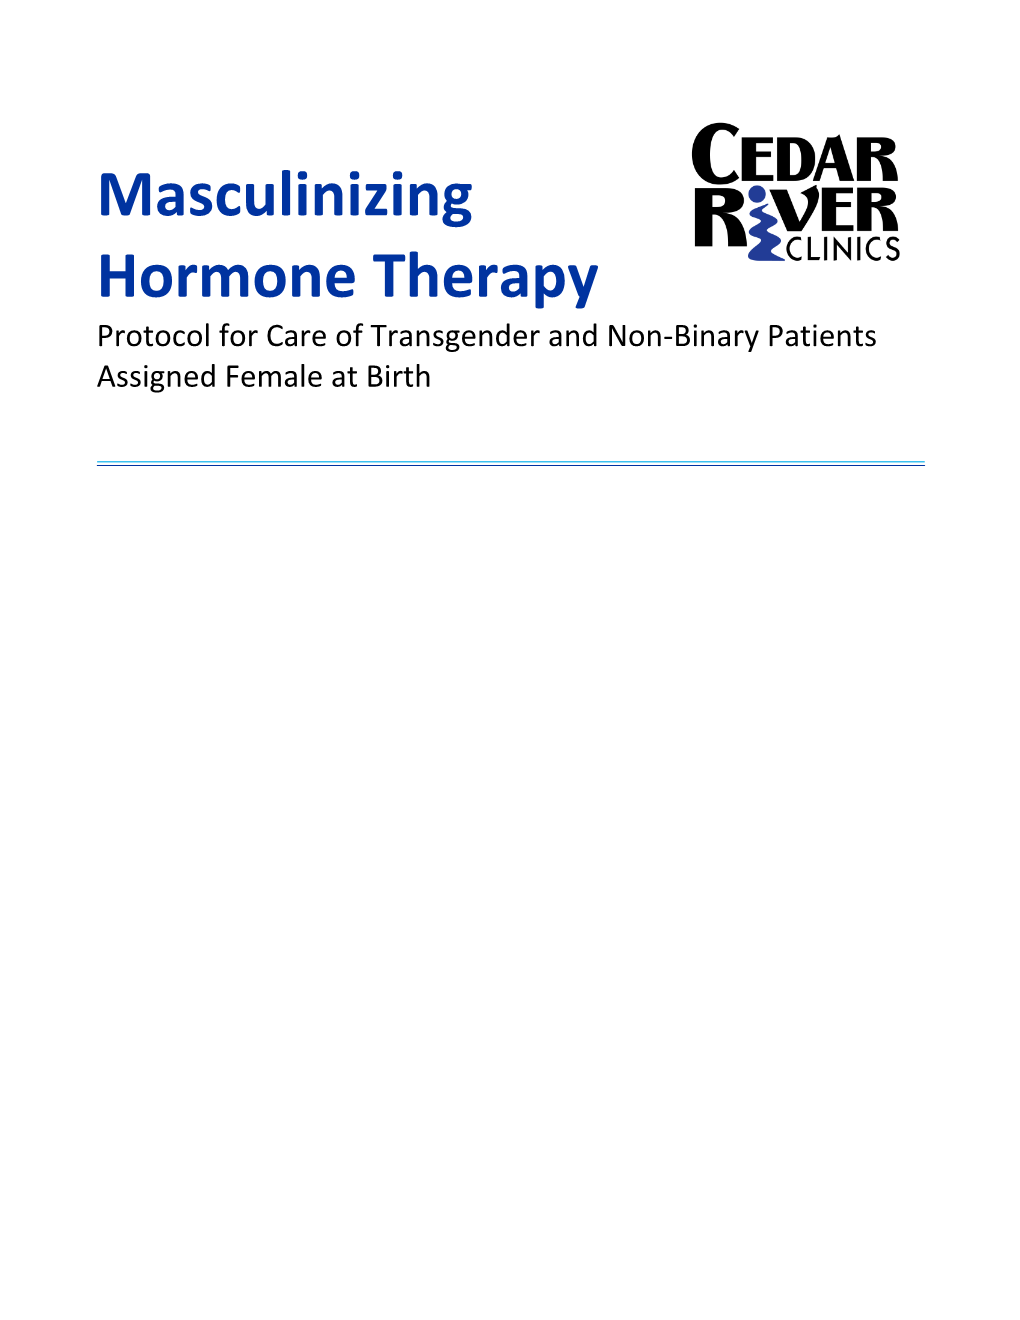 Masculinizing Hormone Therapy Protocol for Care of Transgender and Non-Binary Patients Assigned Female at Birth